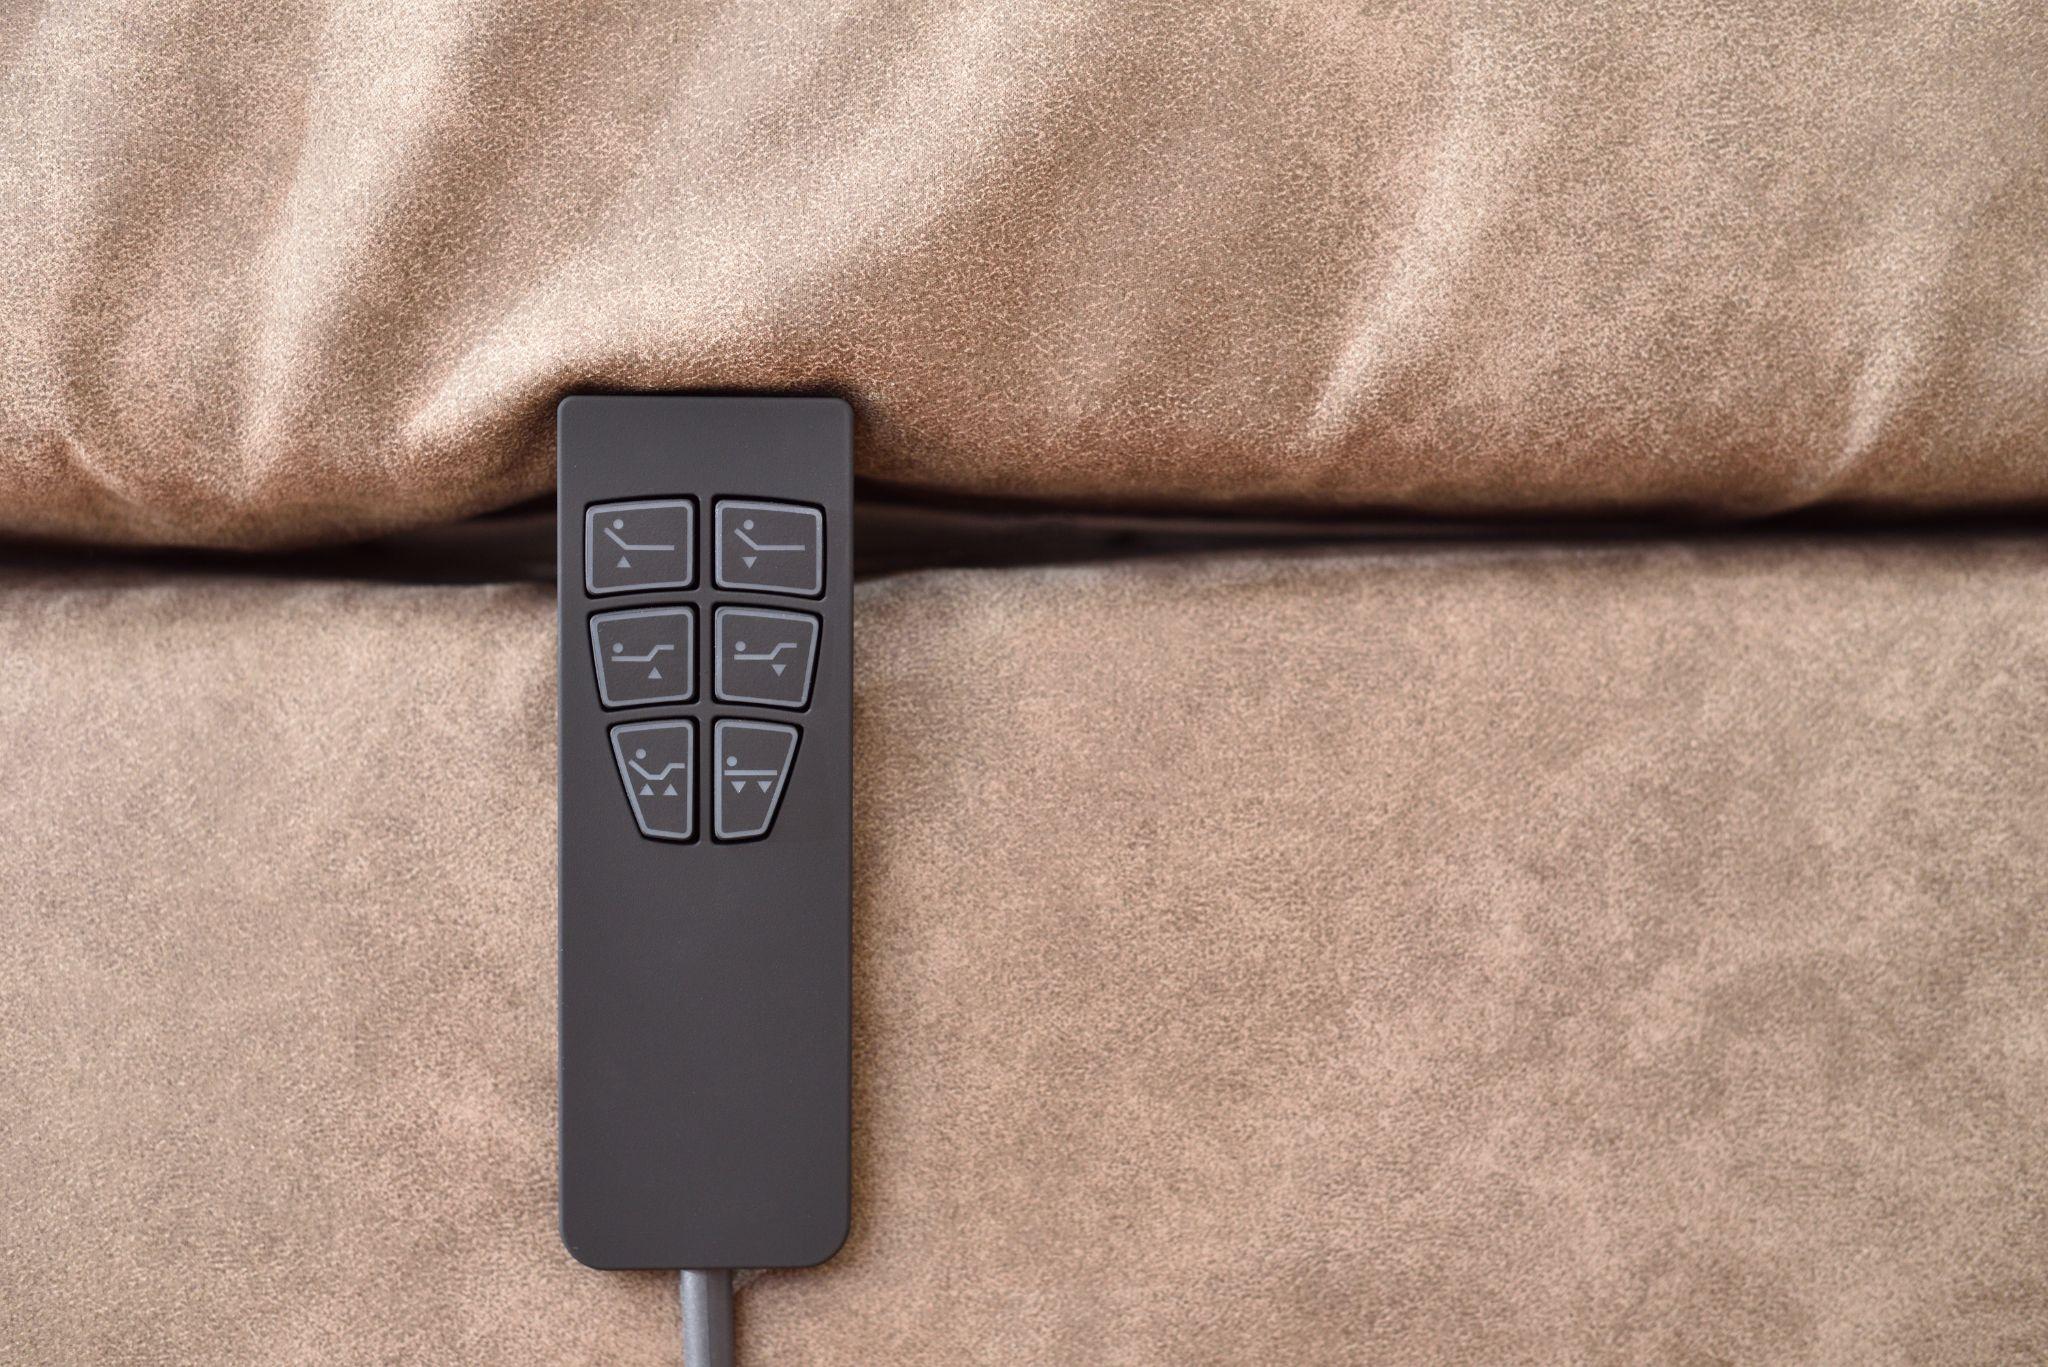 Remote control to adjust the tilt of the mattress bed